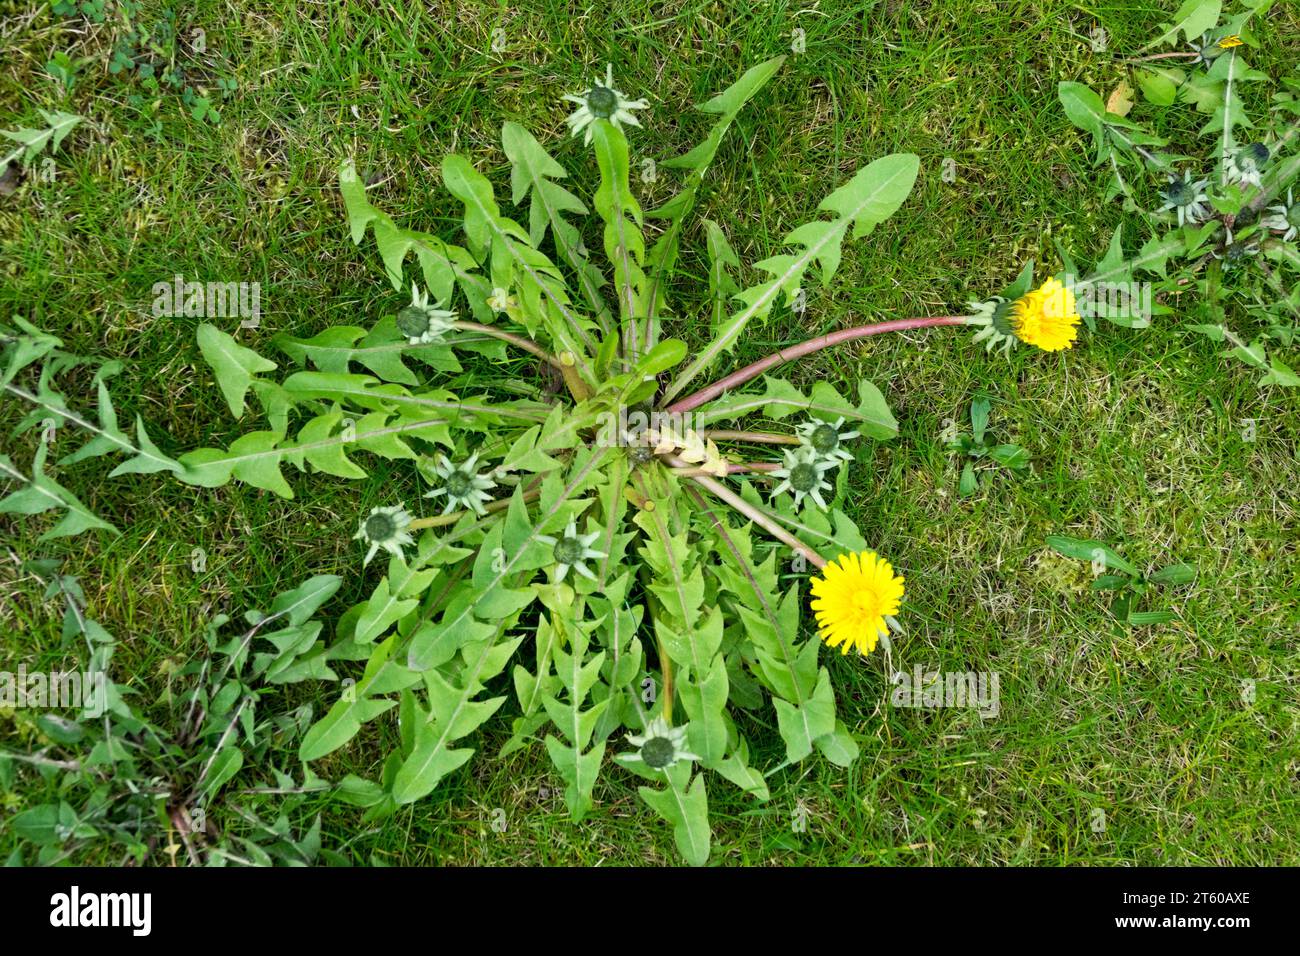 Garden Weed in Lawn Dandelion Taraxacum officinale Hardy Plant Dandelion Weed Lawn Herbaceous Weeds Garden Lawn April Tufted Perennial Plants Growing Stock Photo